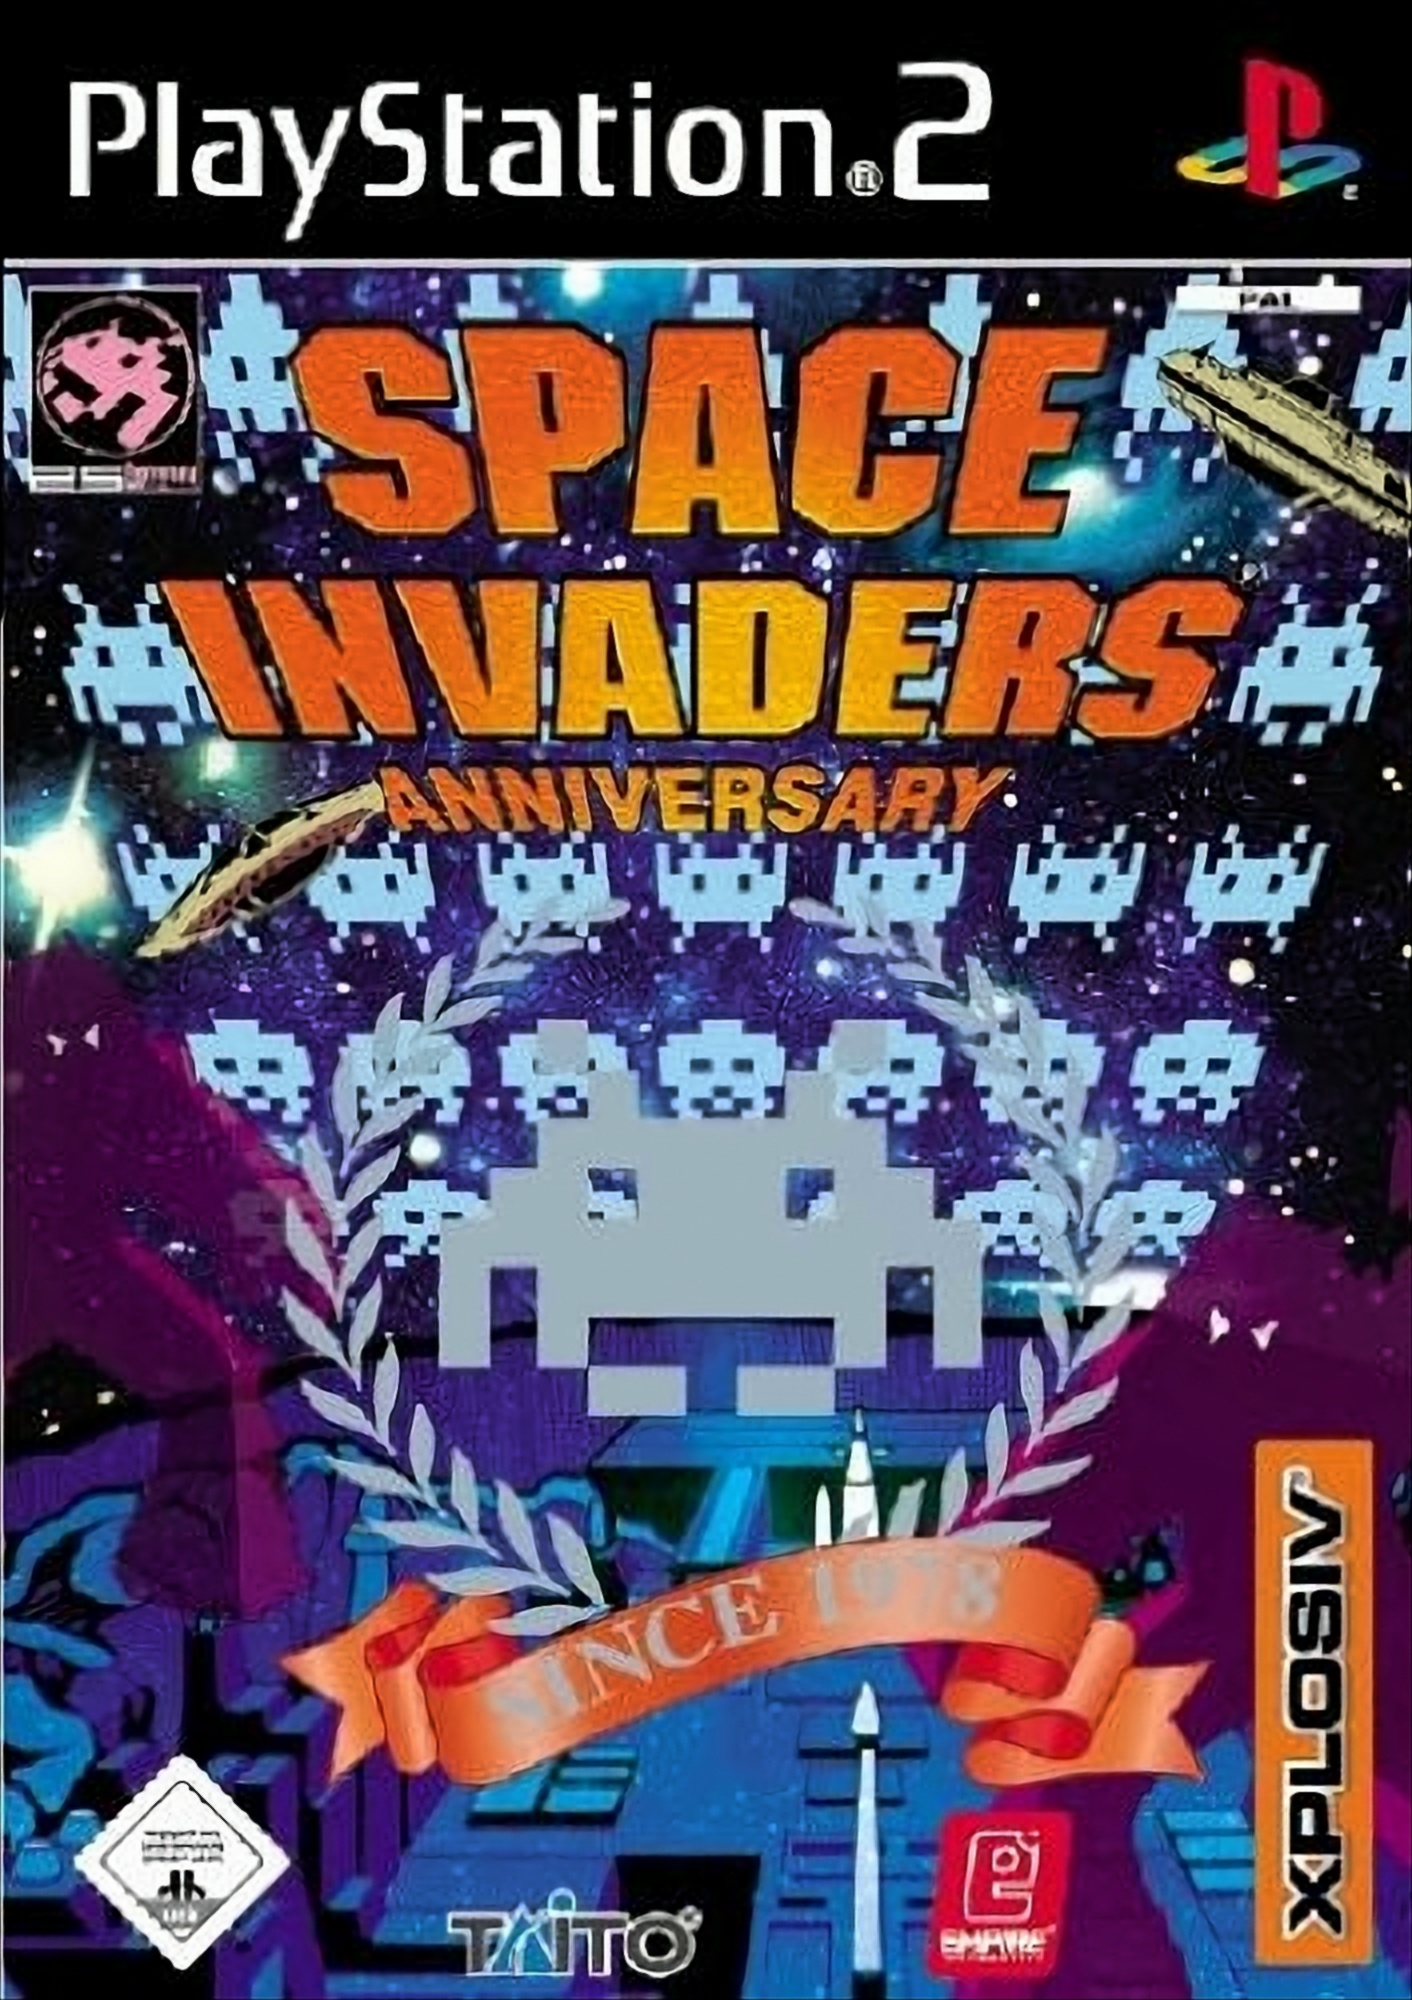 [PlayStation Invaders Anniversary - 2] Space